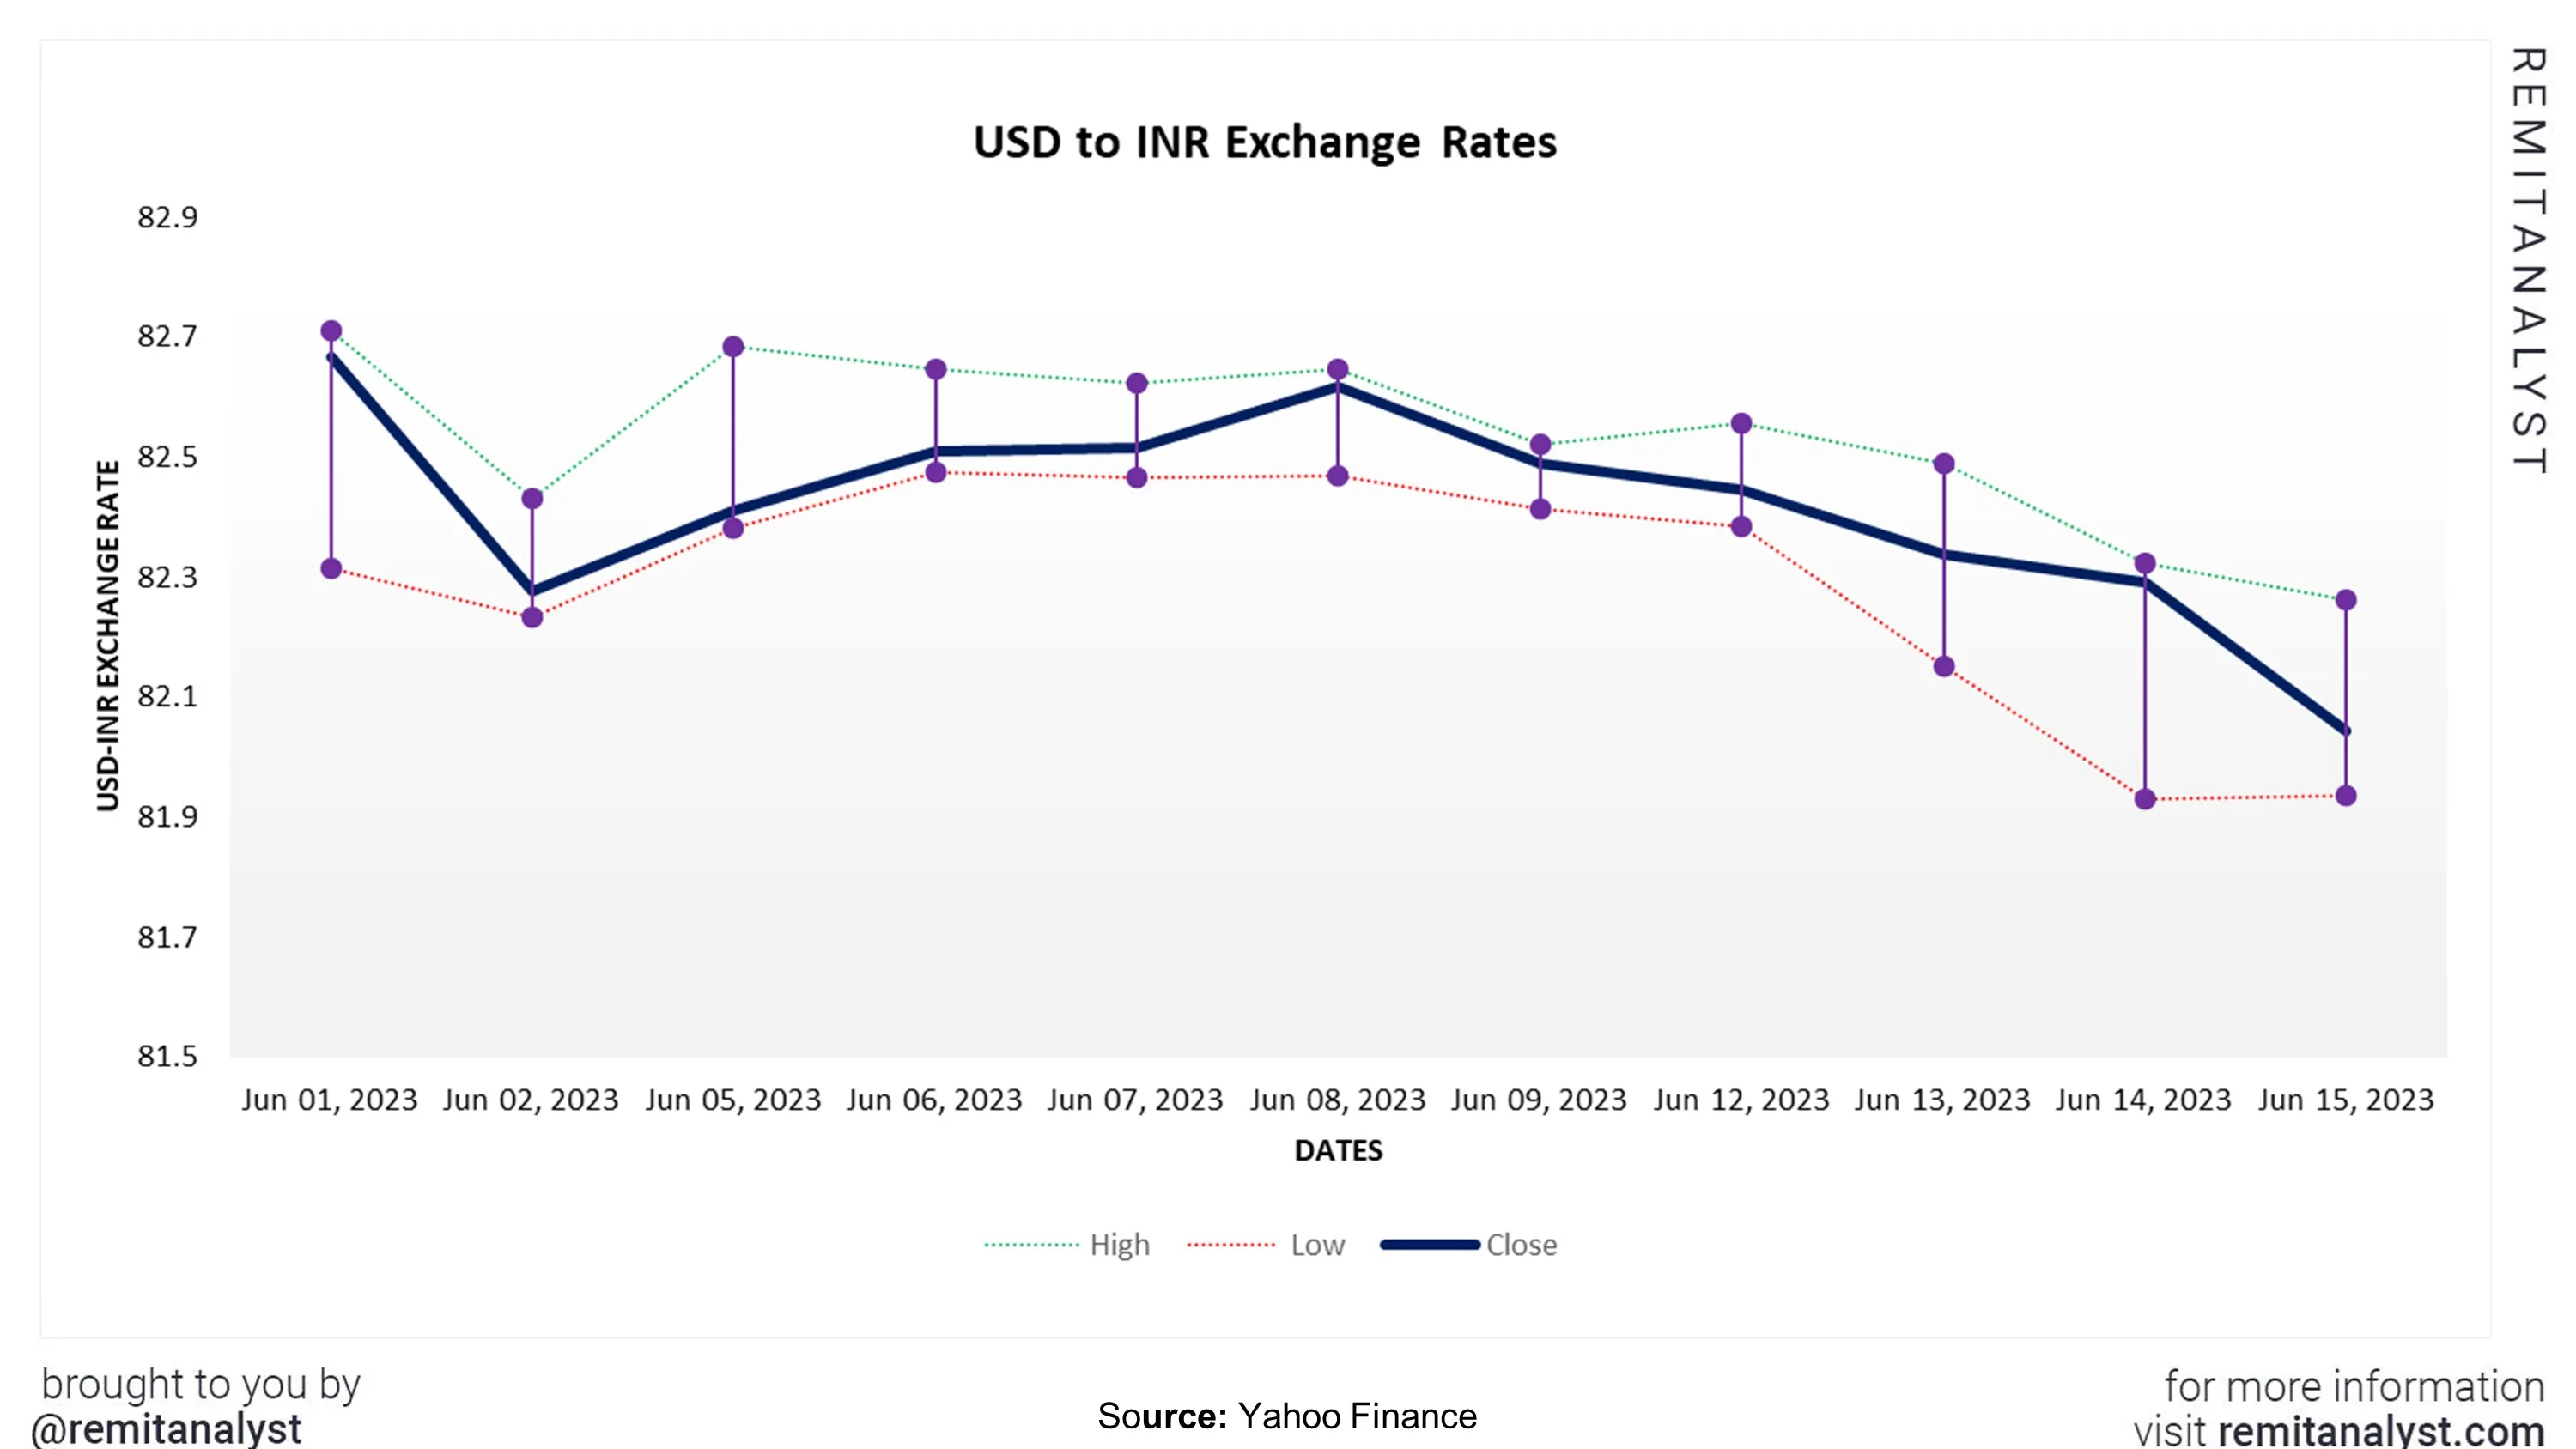 usd-to-inr-exchange-rate-from-1-june-2023-to-15-june-2023